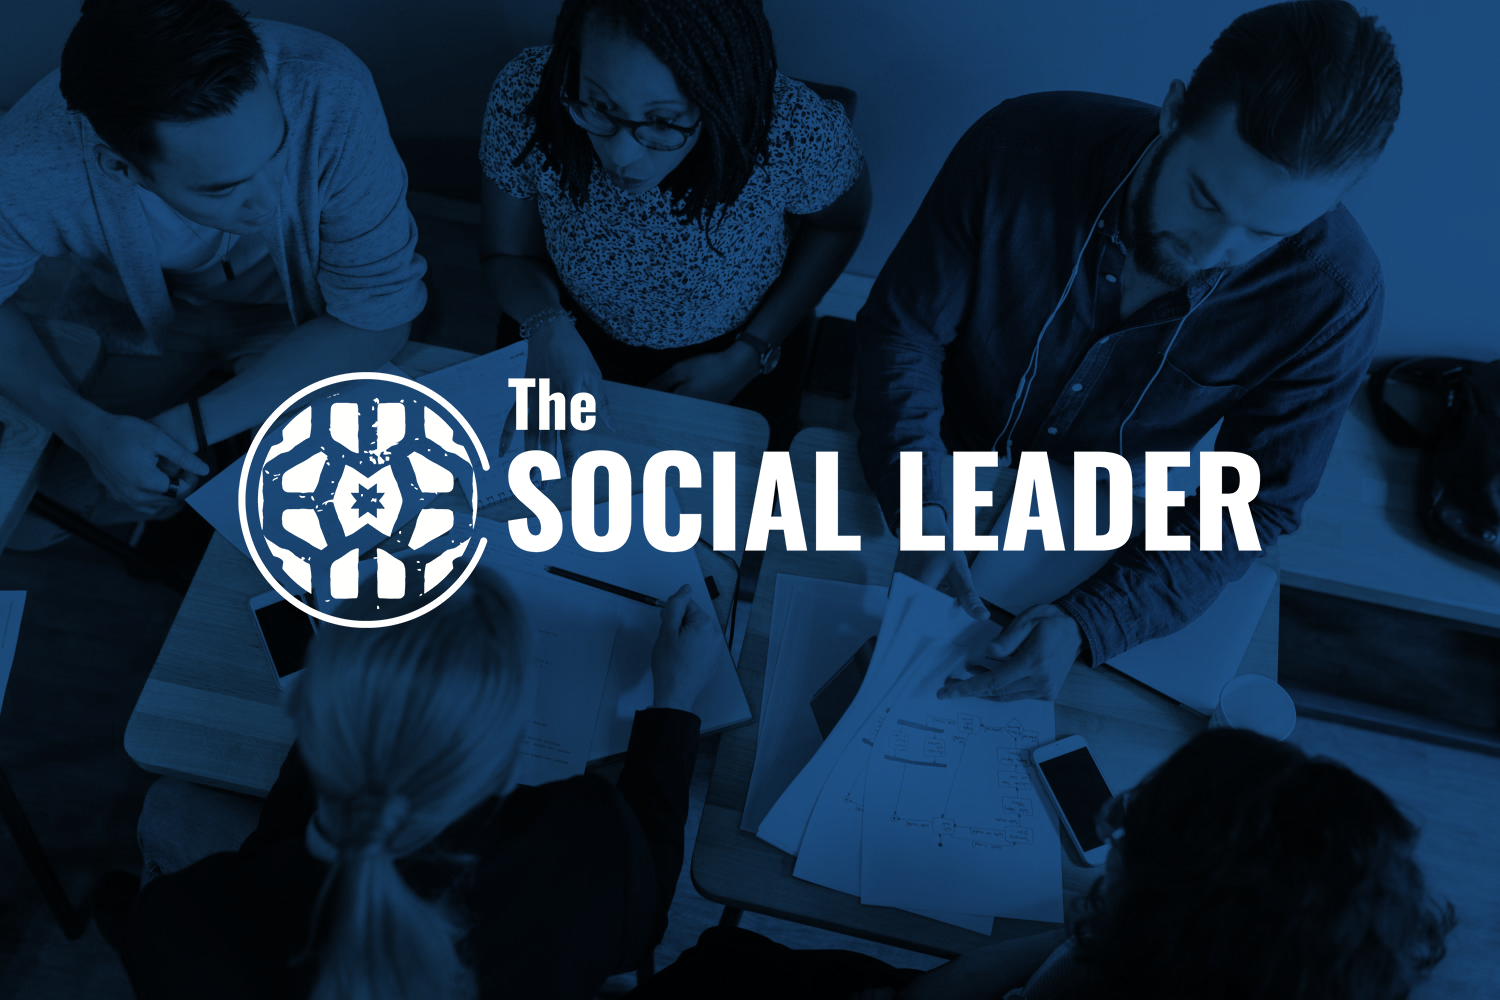 The Social Leader logo overlaying an image of an active business meeting at a conference table